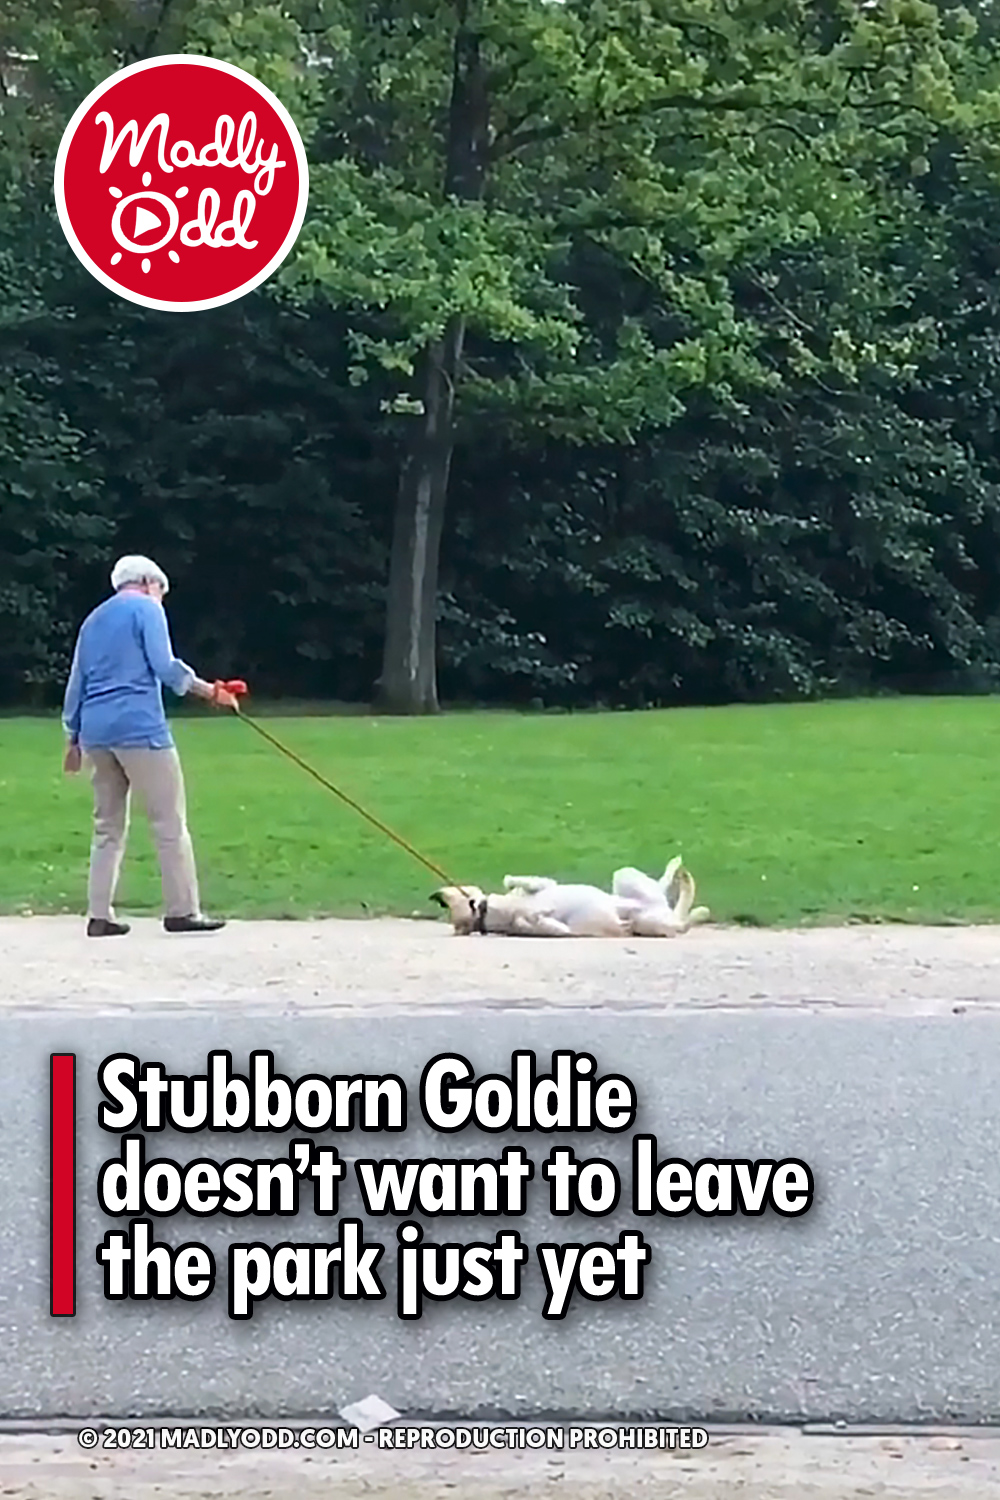 Stubborn Goldie doesn’t want to leave the park just yet